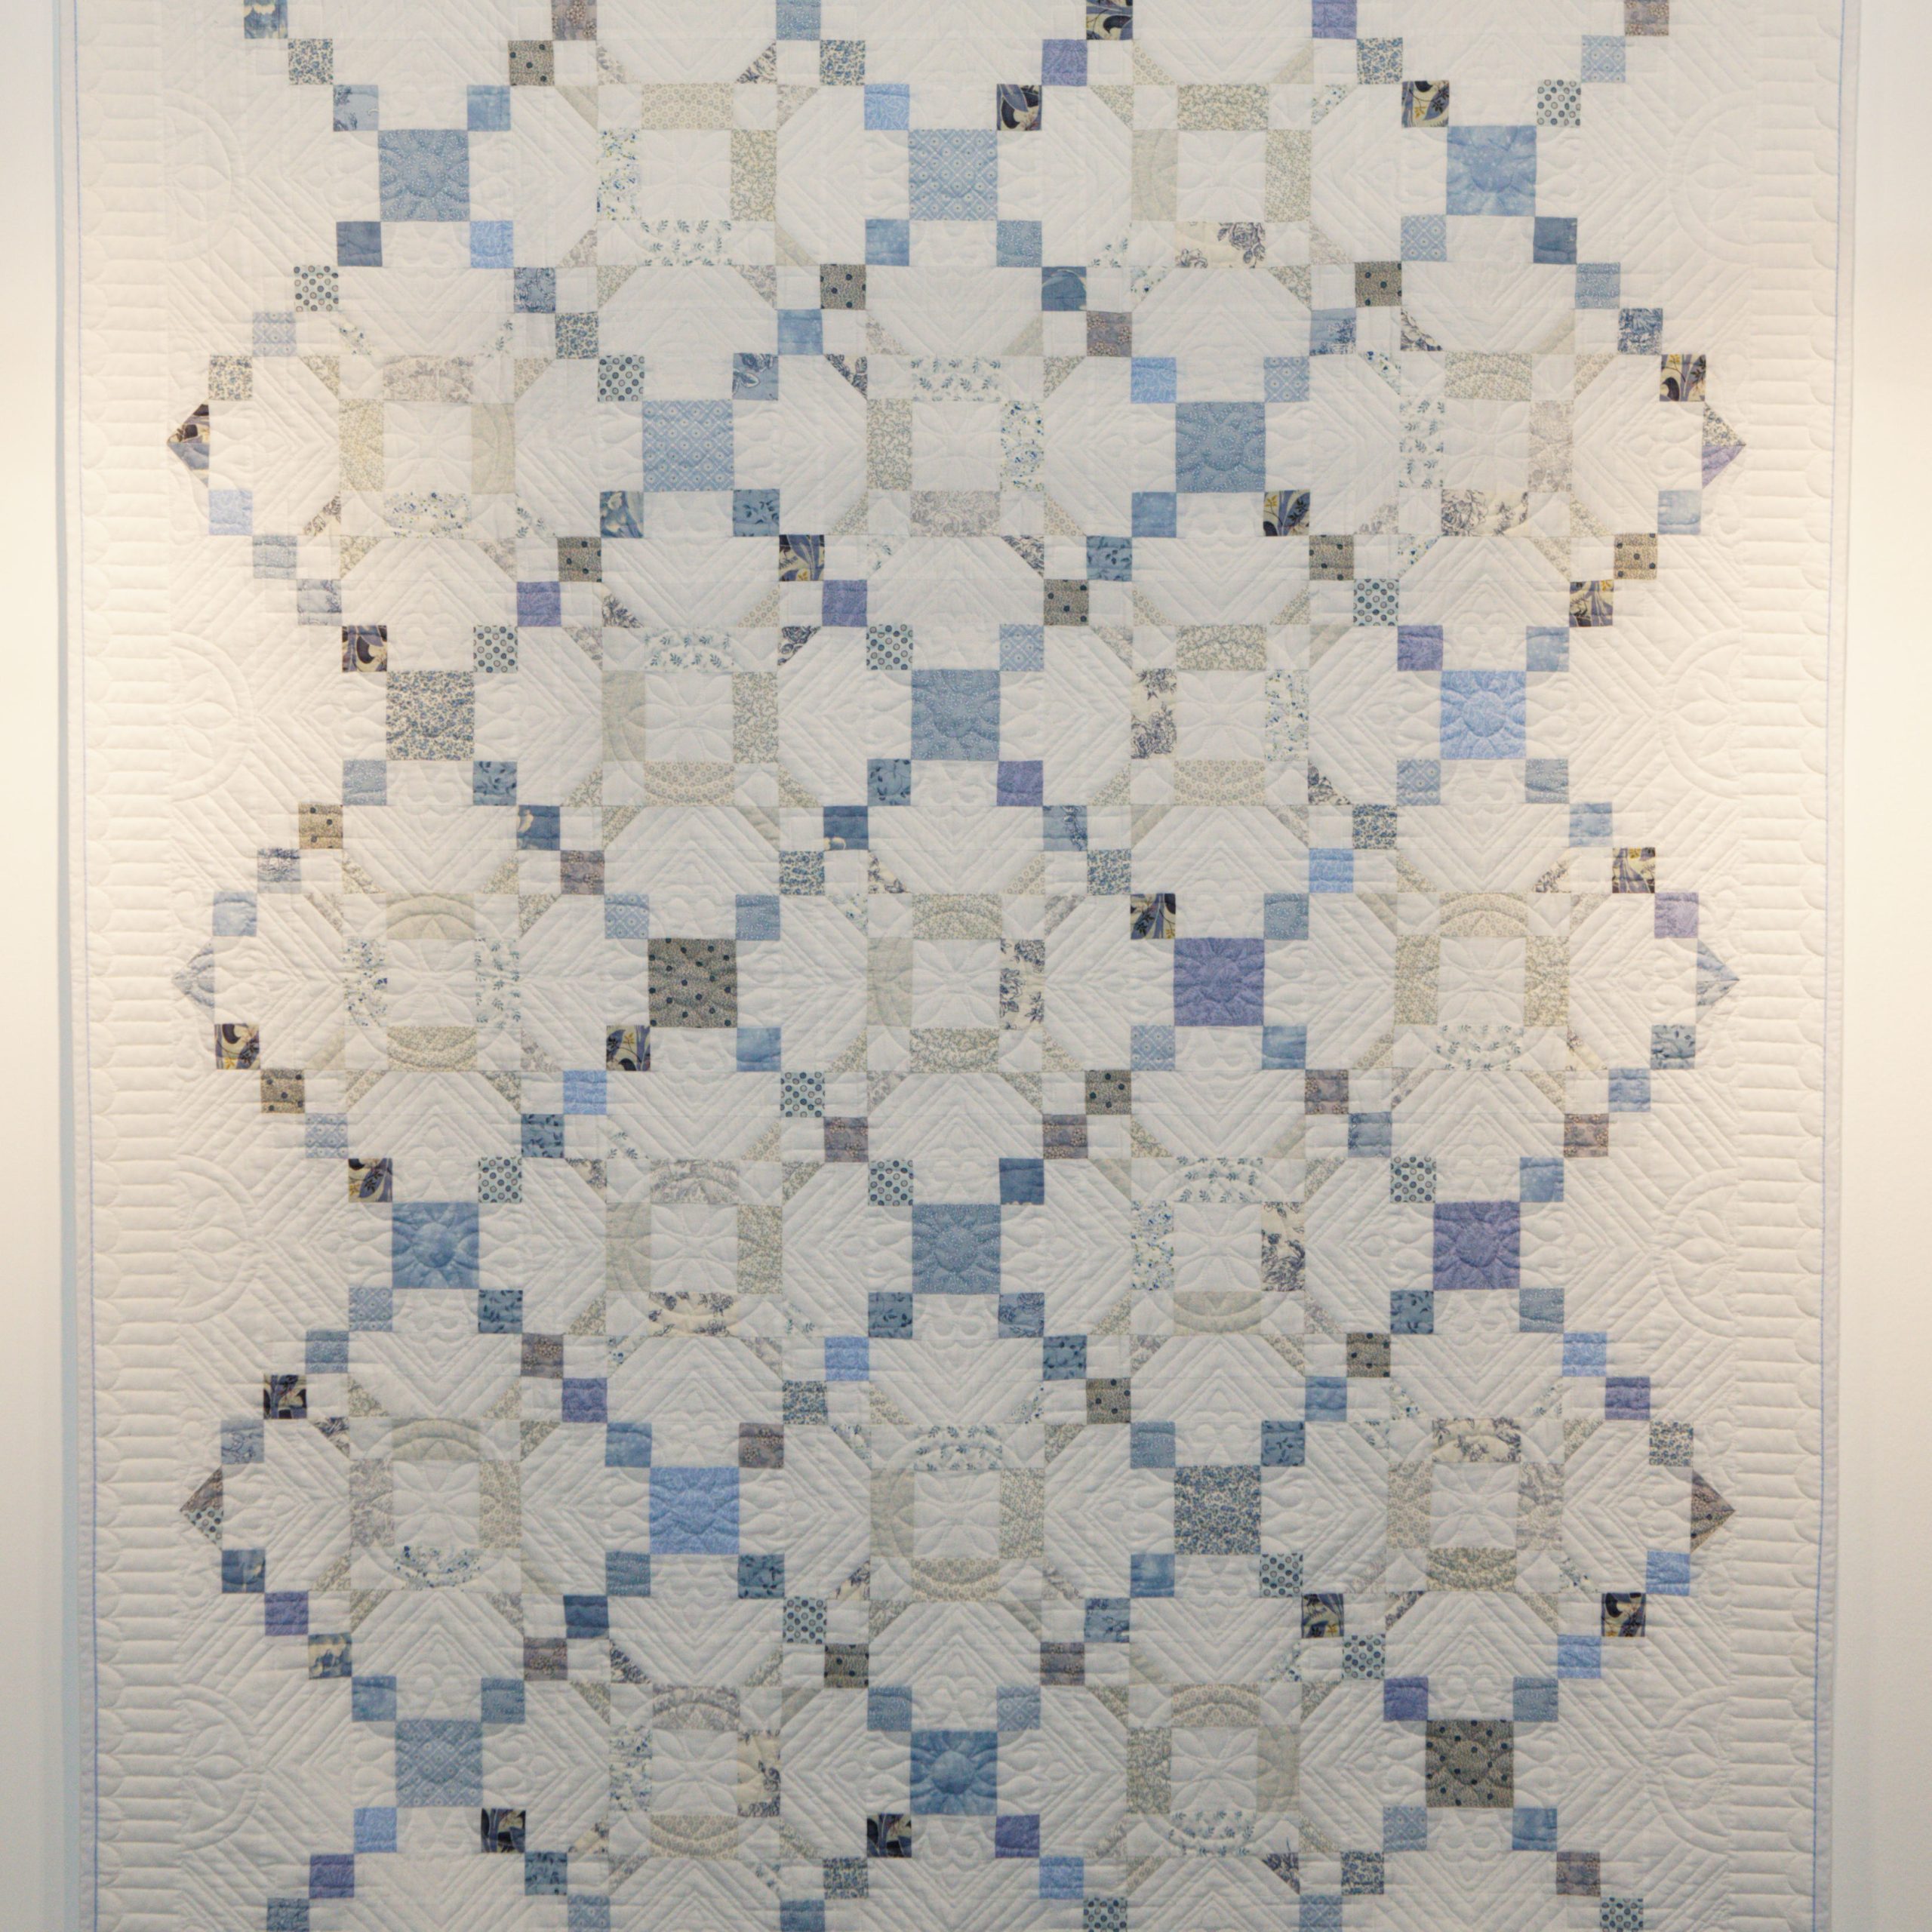 Overlay-Excellence-Hand-Quilting.-Gwenfai-Rees-Griffiths.-China-Blue-scaled